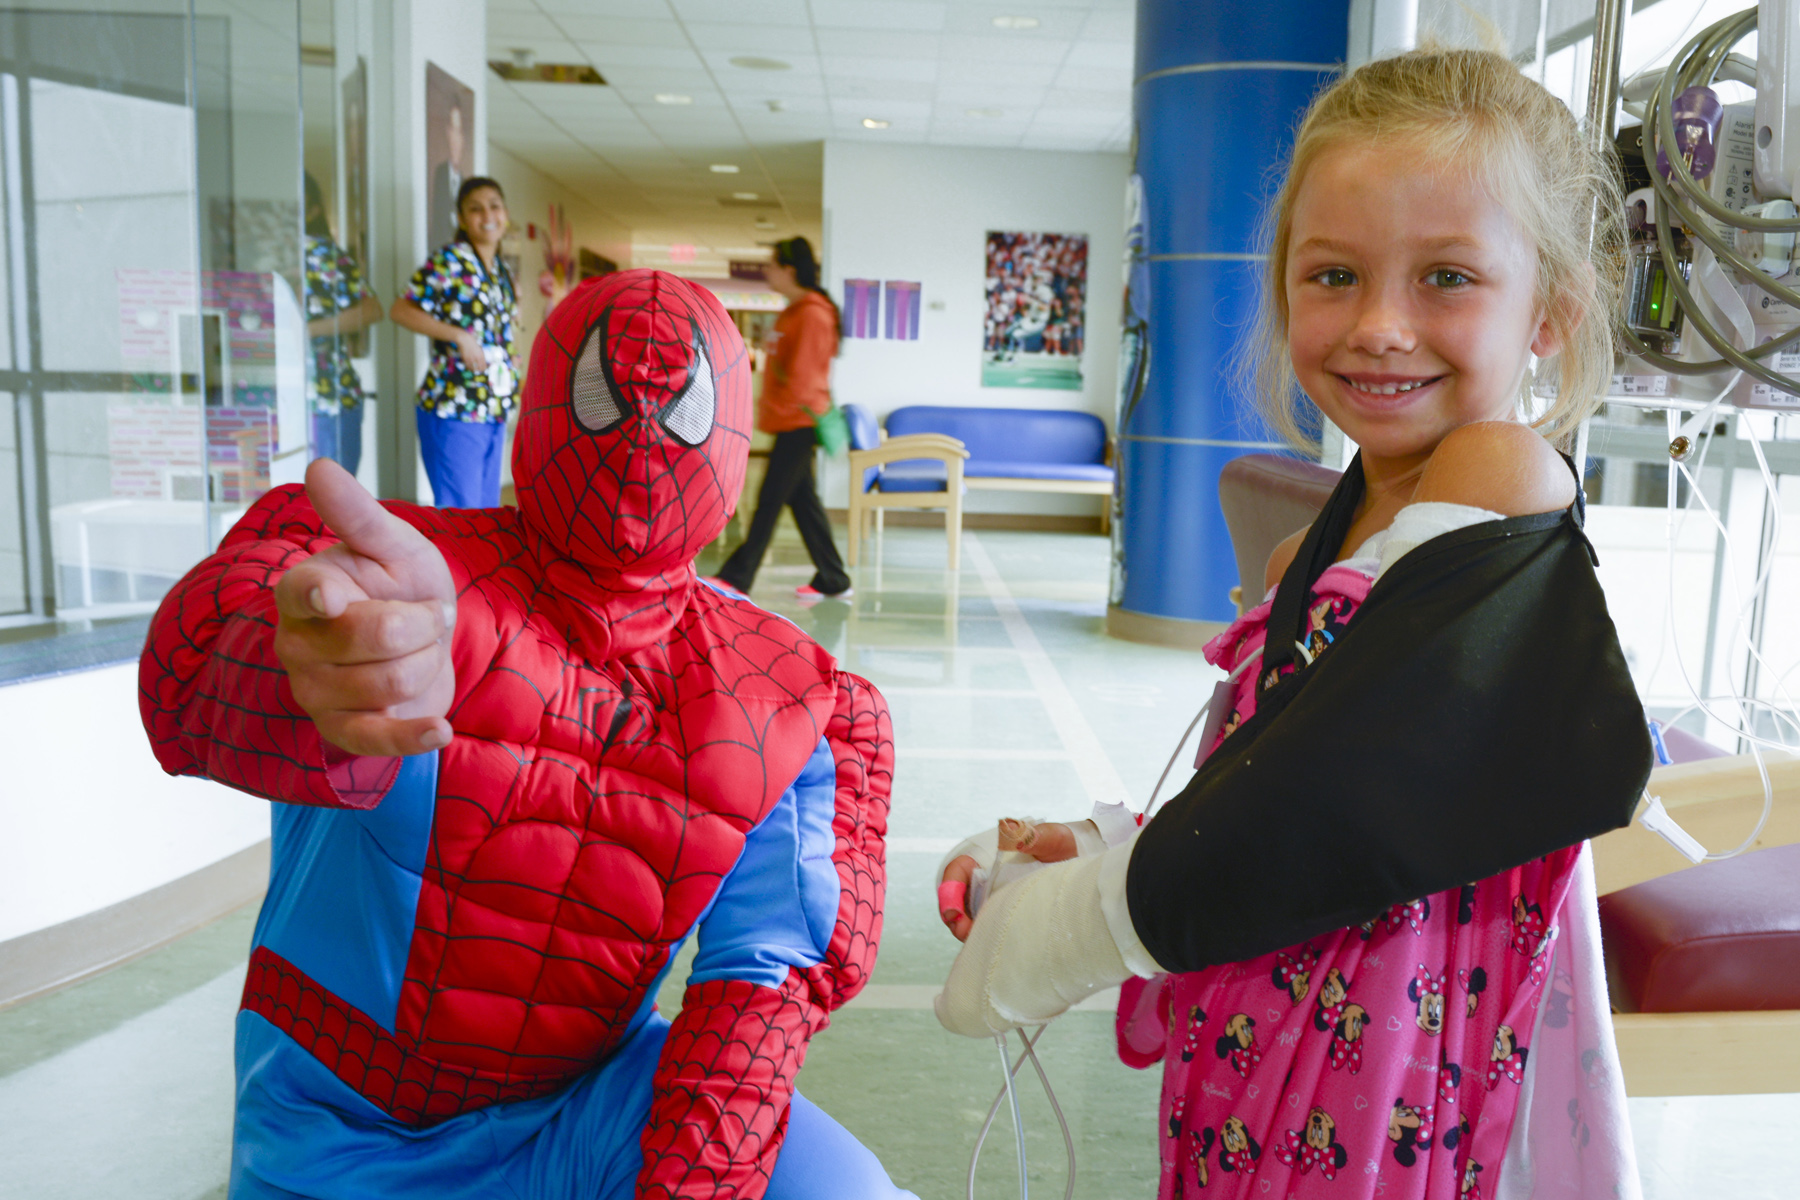 Children went to the hospital's playroom to visit with Spiderman.